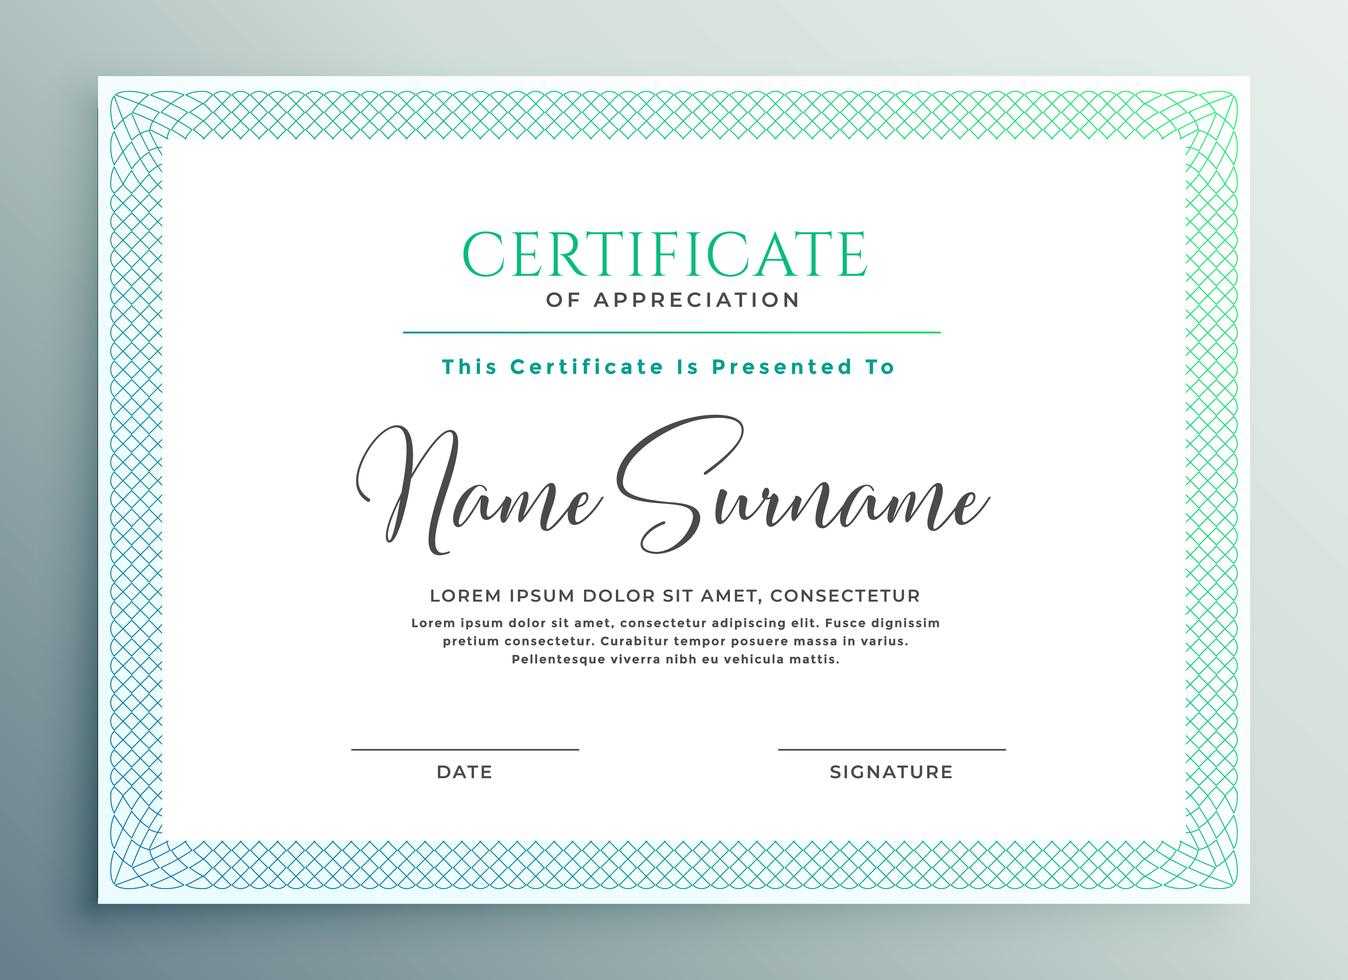 30+ Certificate Of Appreciation Download!! | Templates Study Inside Volunteer Of The Year Certificate Template